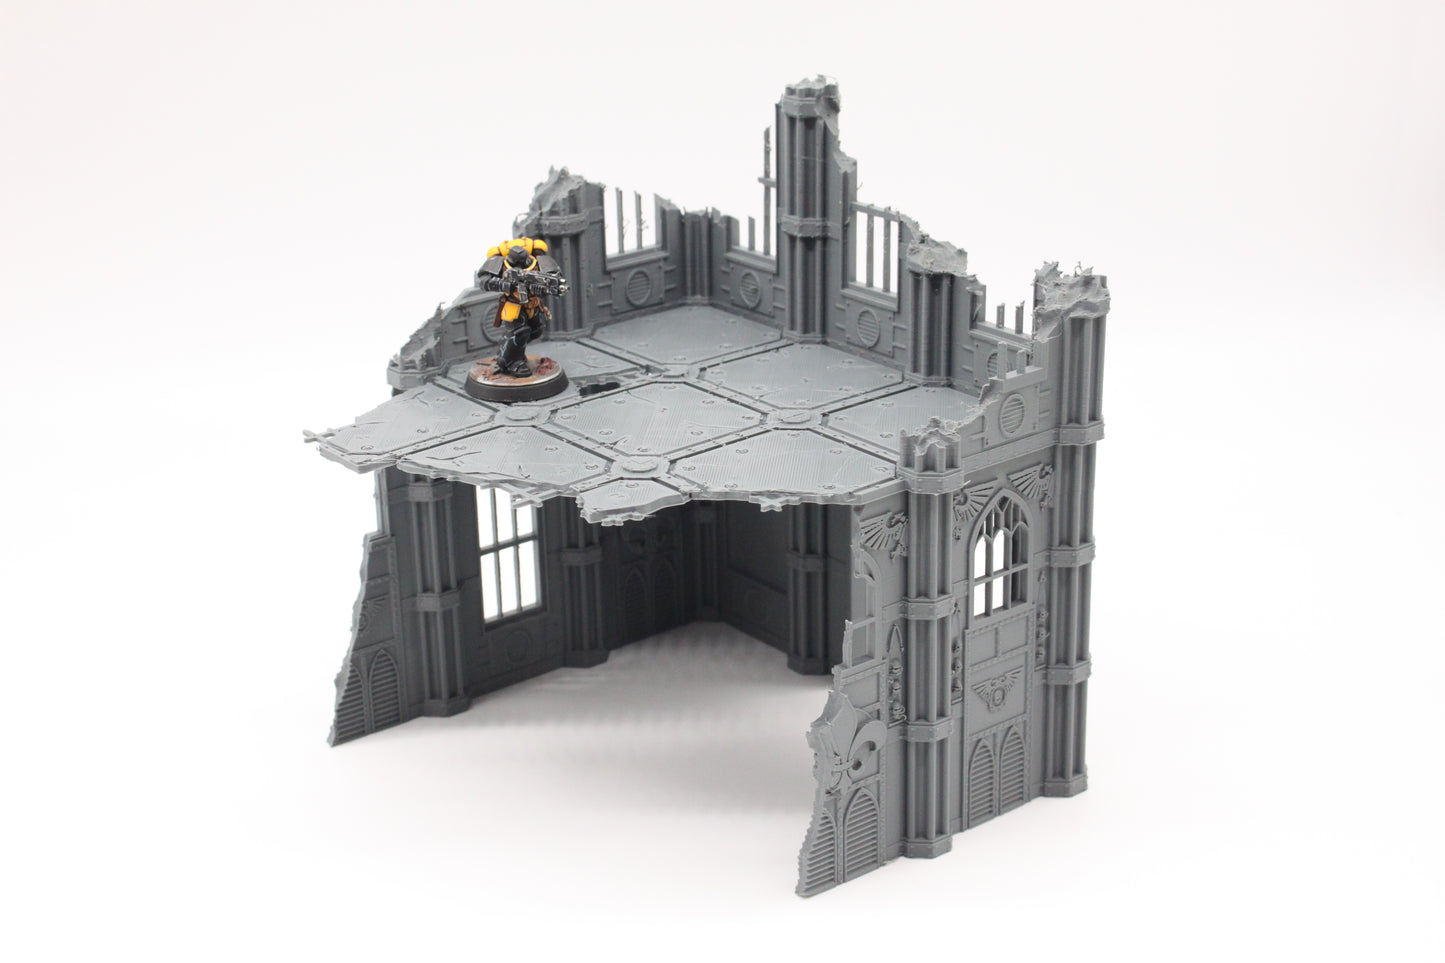 Bundle 4 of Gothic Ruined Buildings